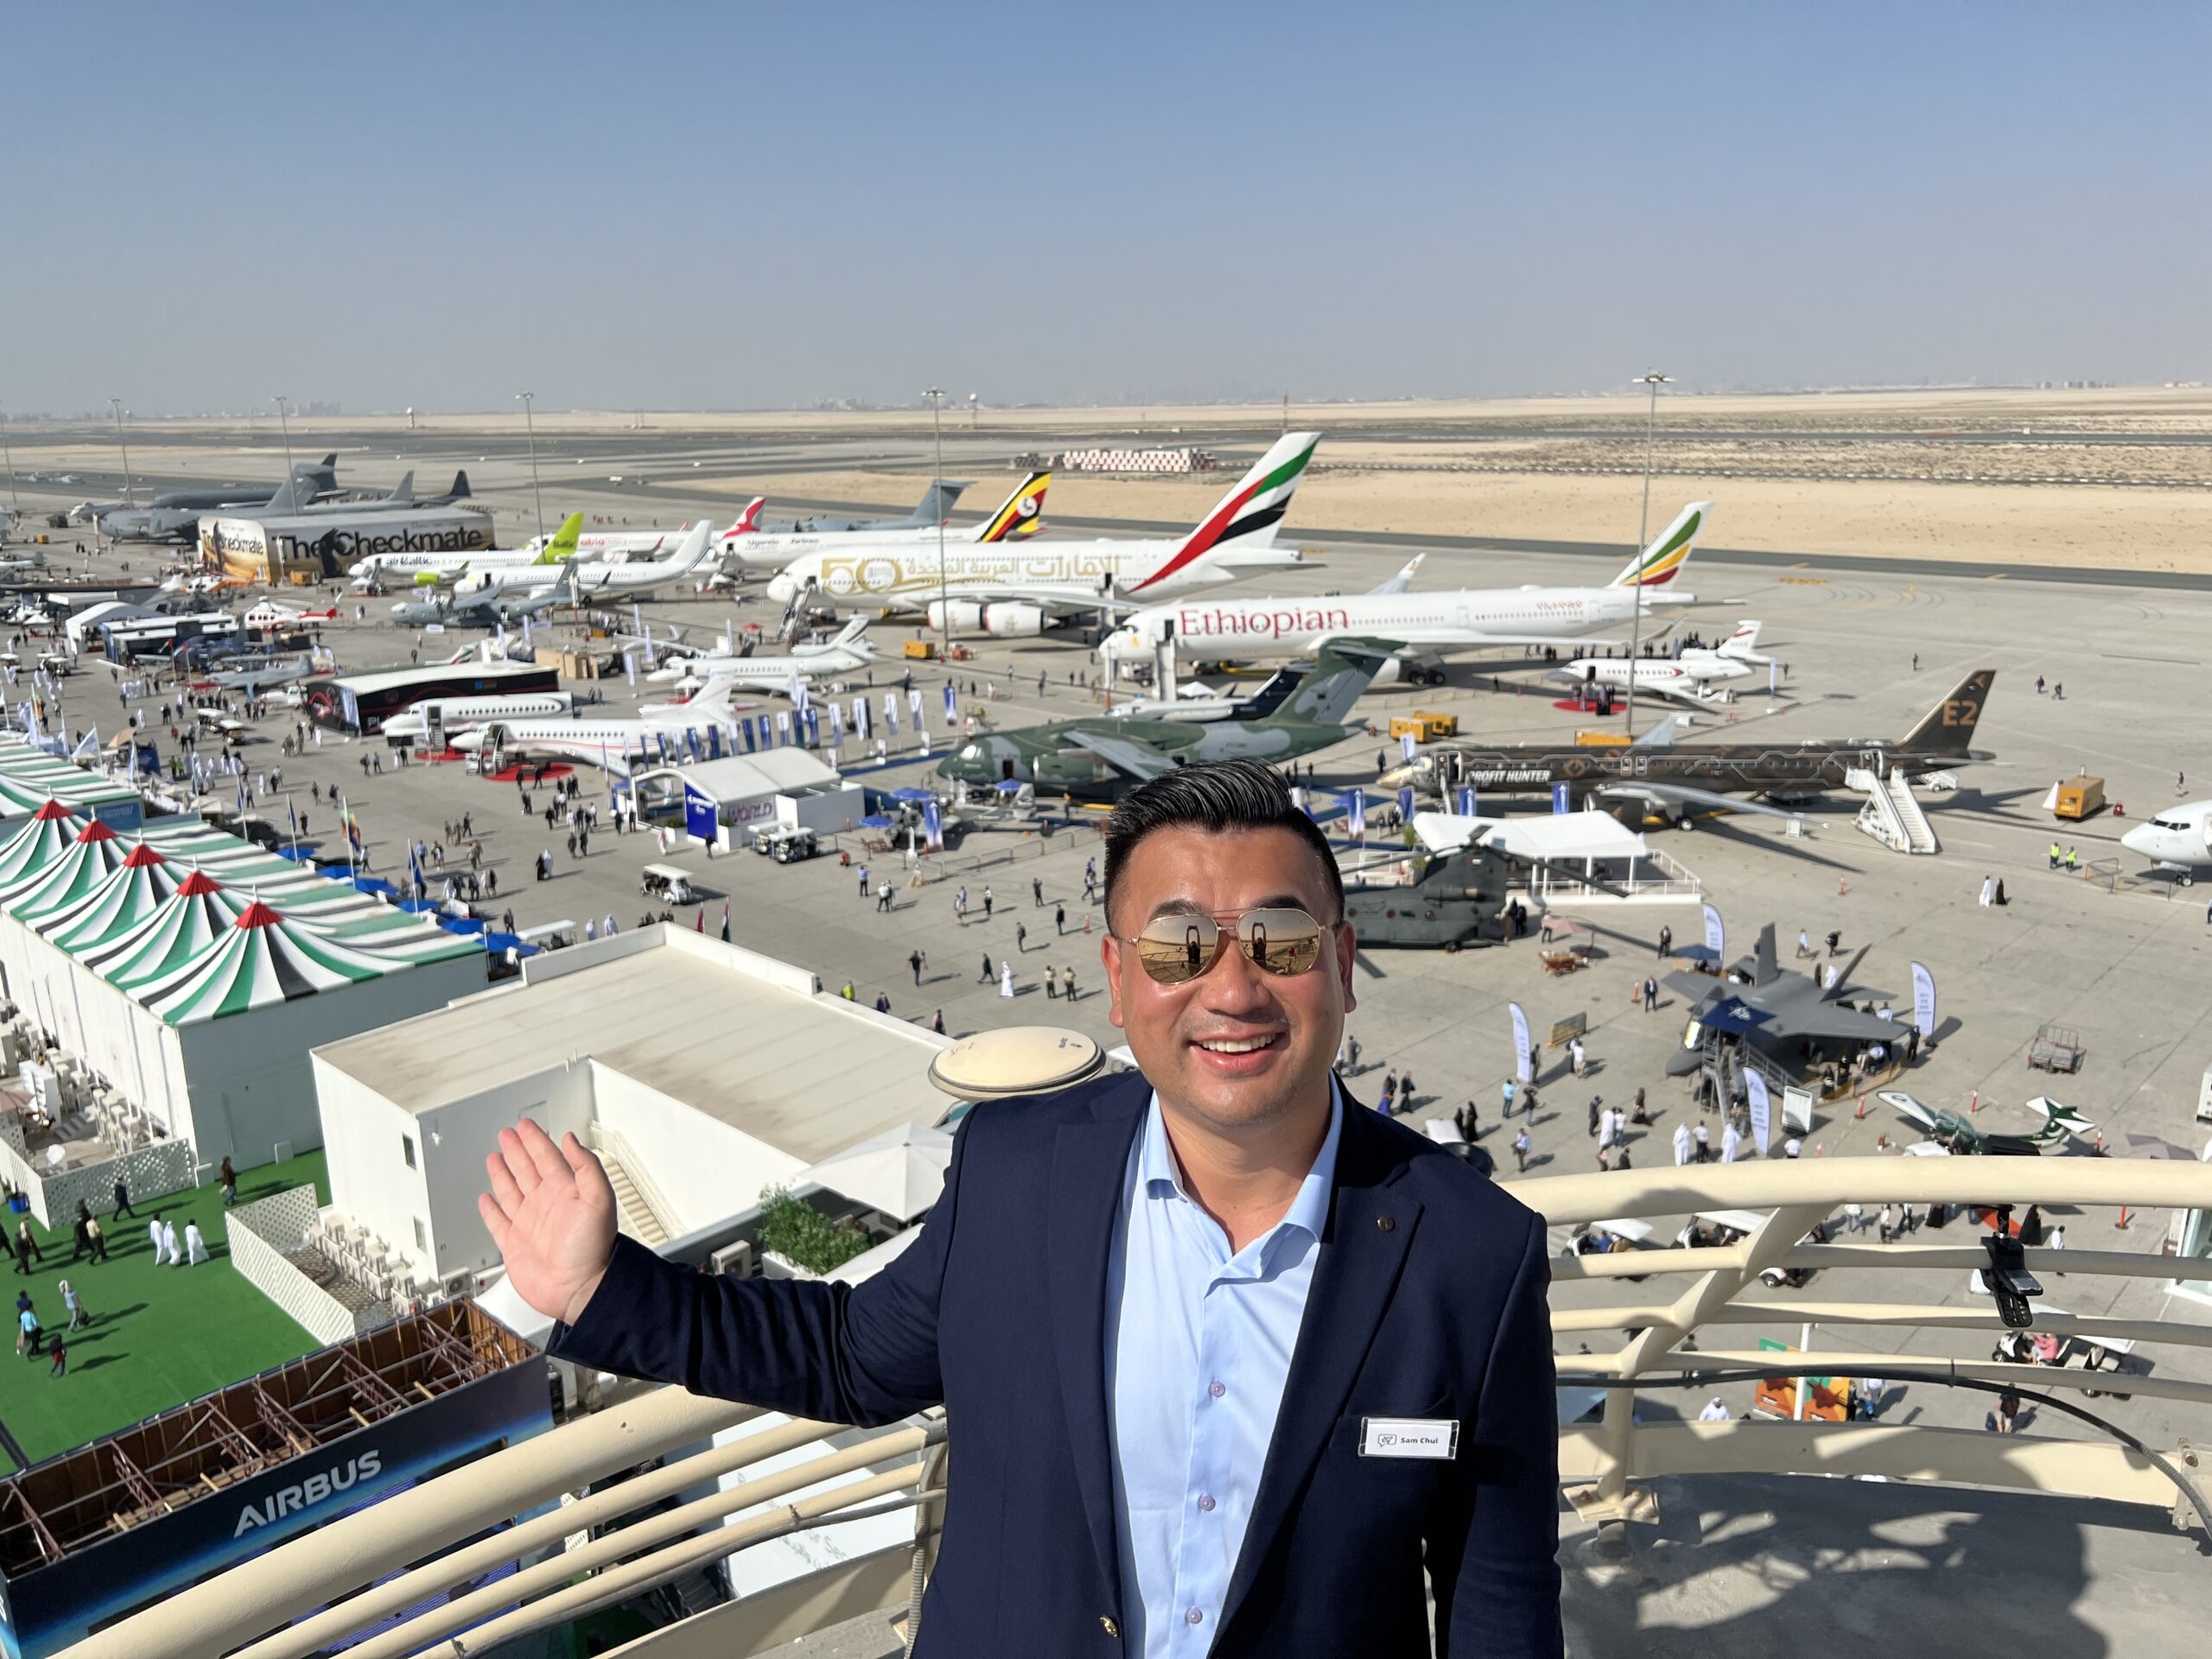 a man standing on a balcony with planes in the background